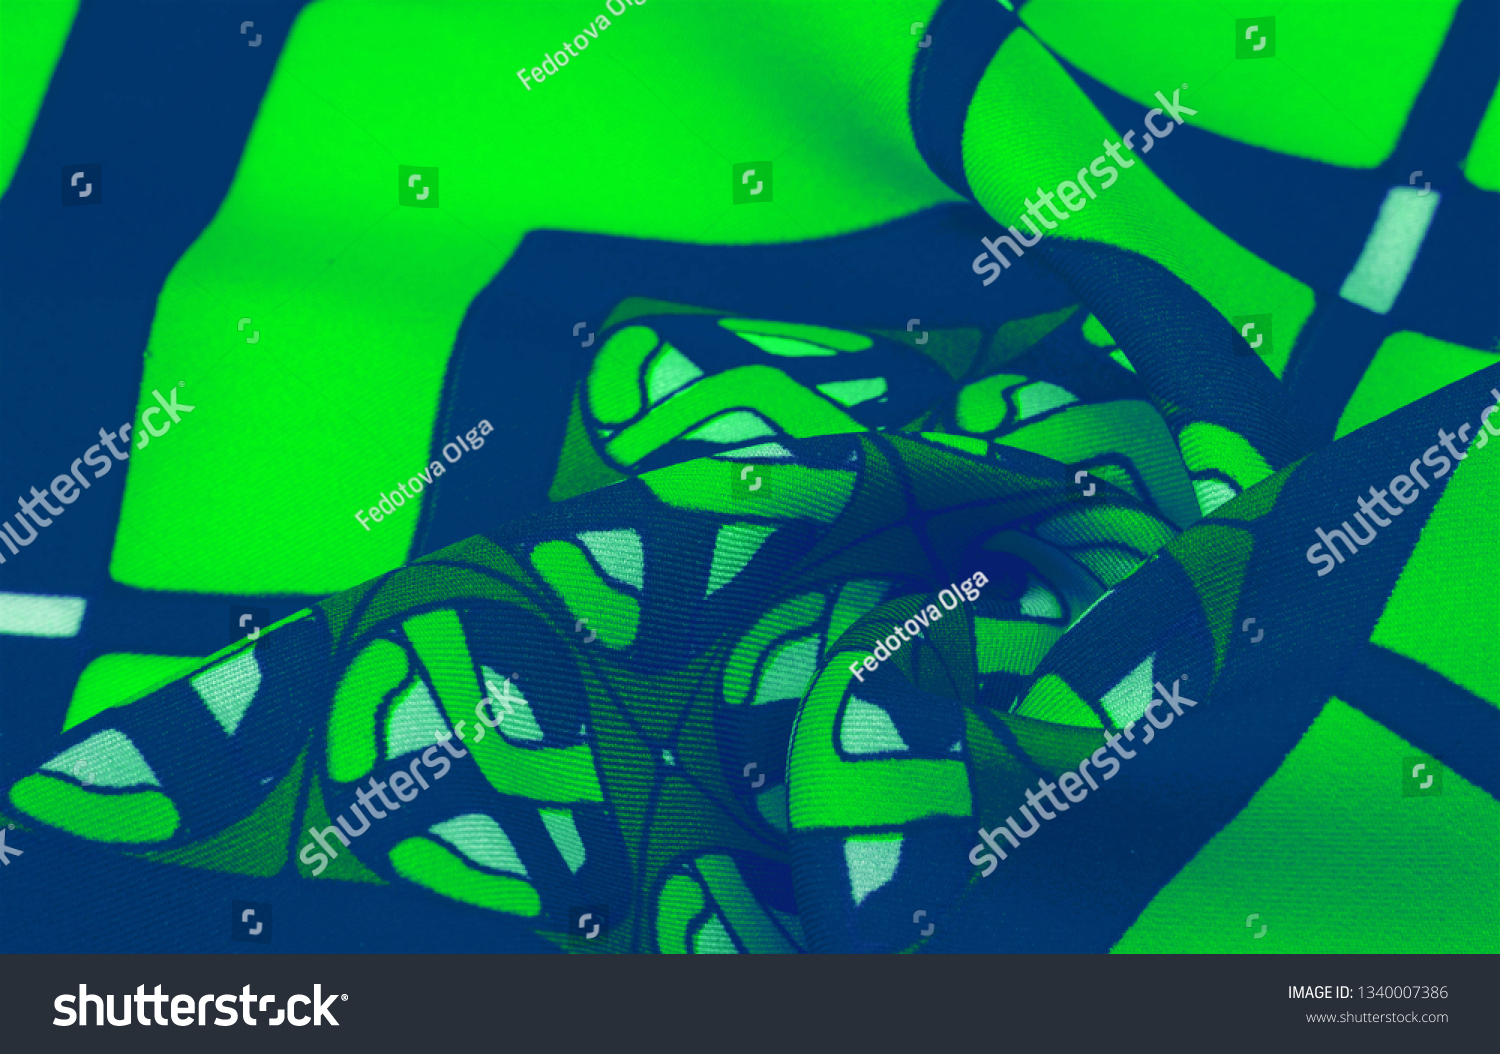 Background texture. silk bright fabric Mosaic geometric shapes Composition with colorful stained glass Grid design Illustration of green blue white olive colors #1340007386